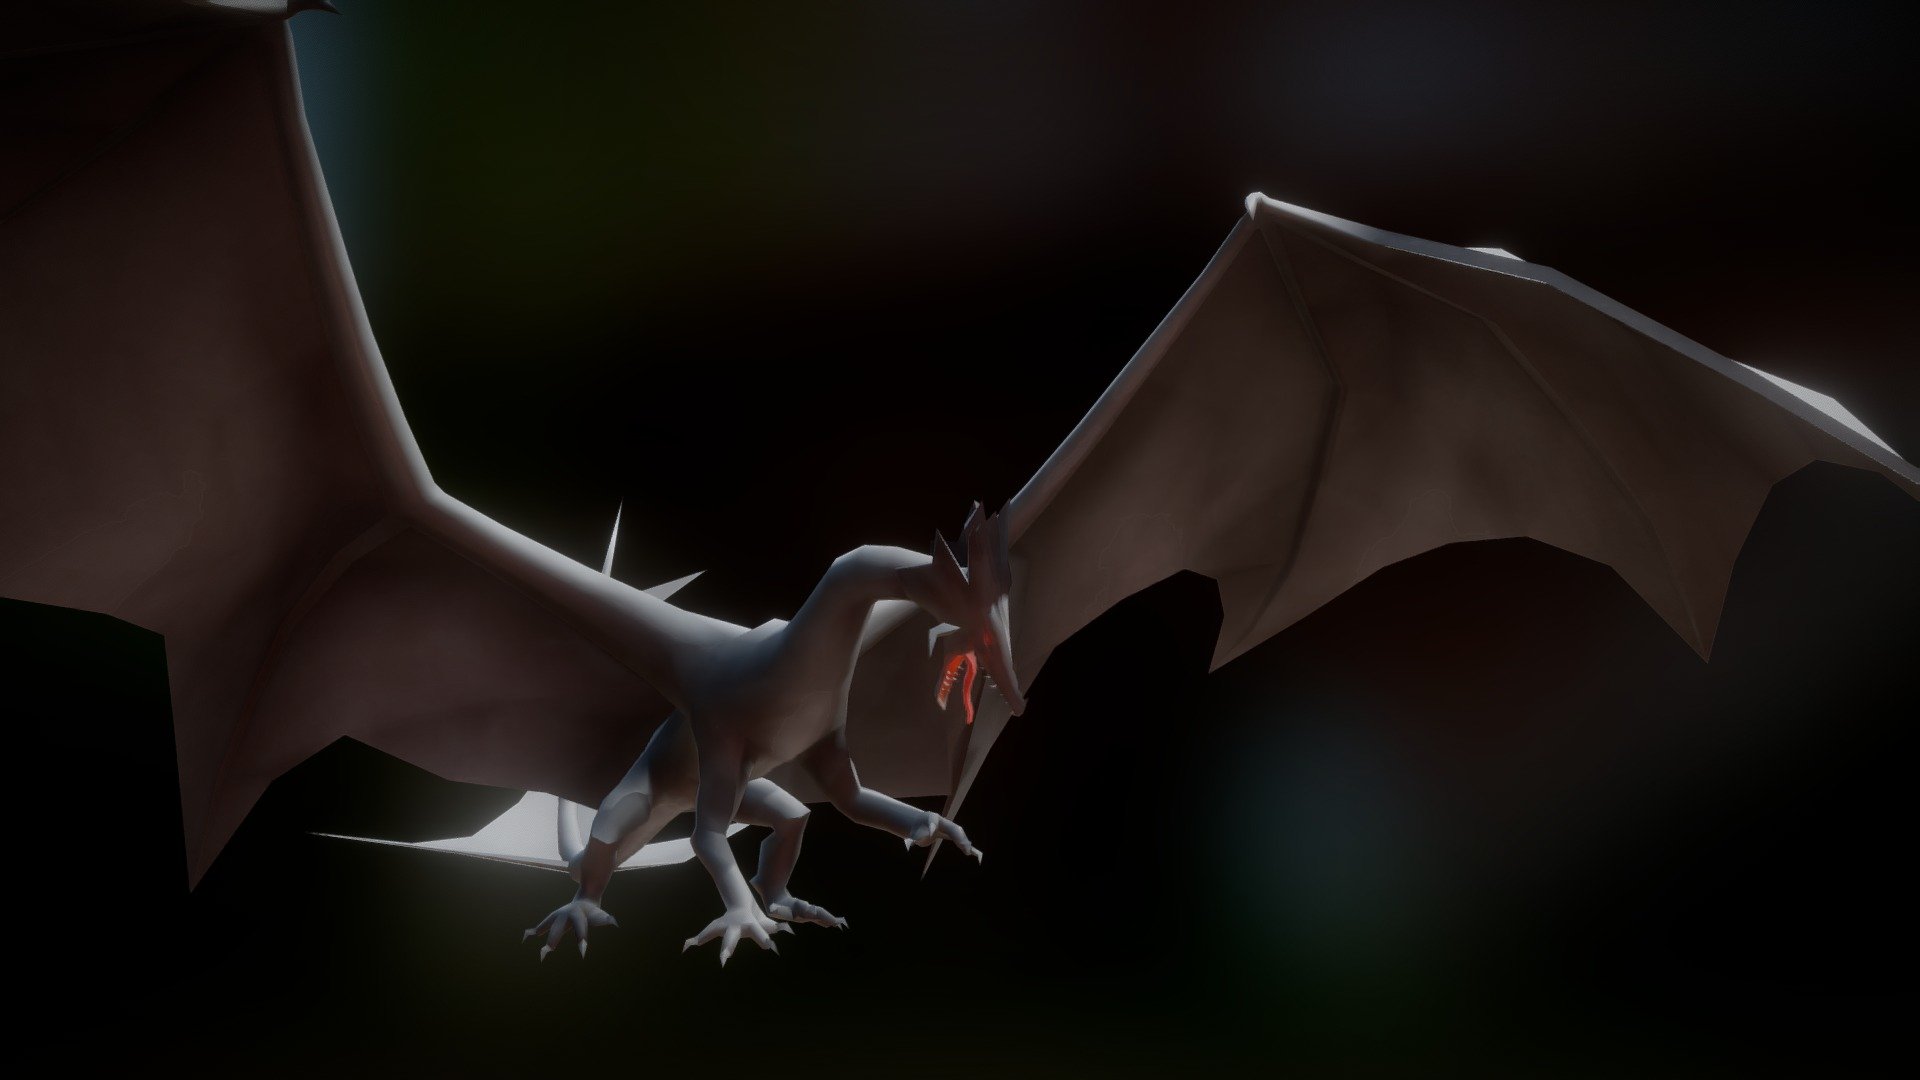 Four legged low poly dragon with more sensible proportioned wings.
Model Rigged and 3 example poses.
Hand painted Texture included - Low Poly Dragon - Buy Royalty Free 3D model by Mr. The Rich (@MrTheRich) 3d model